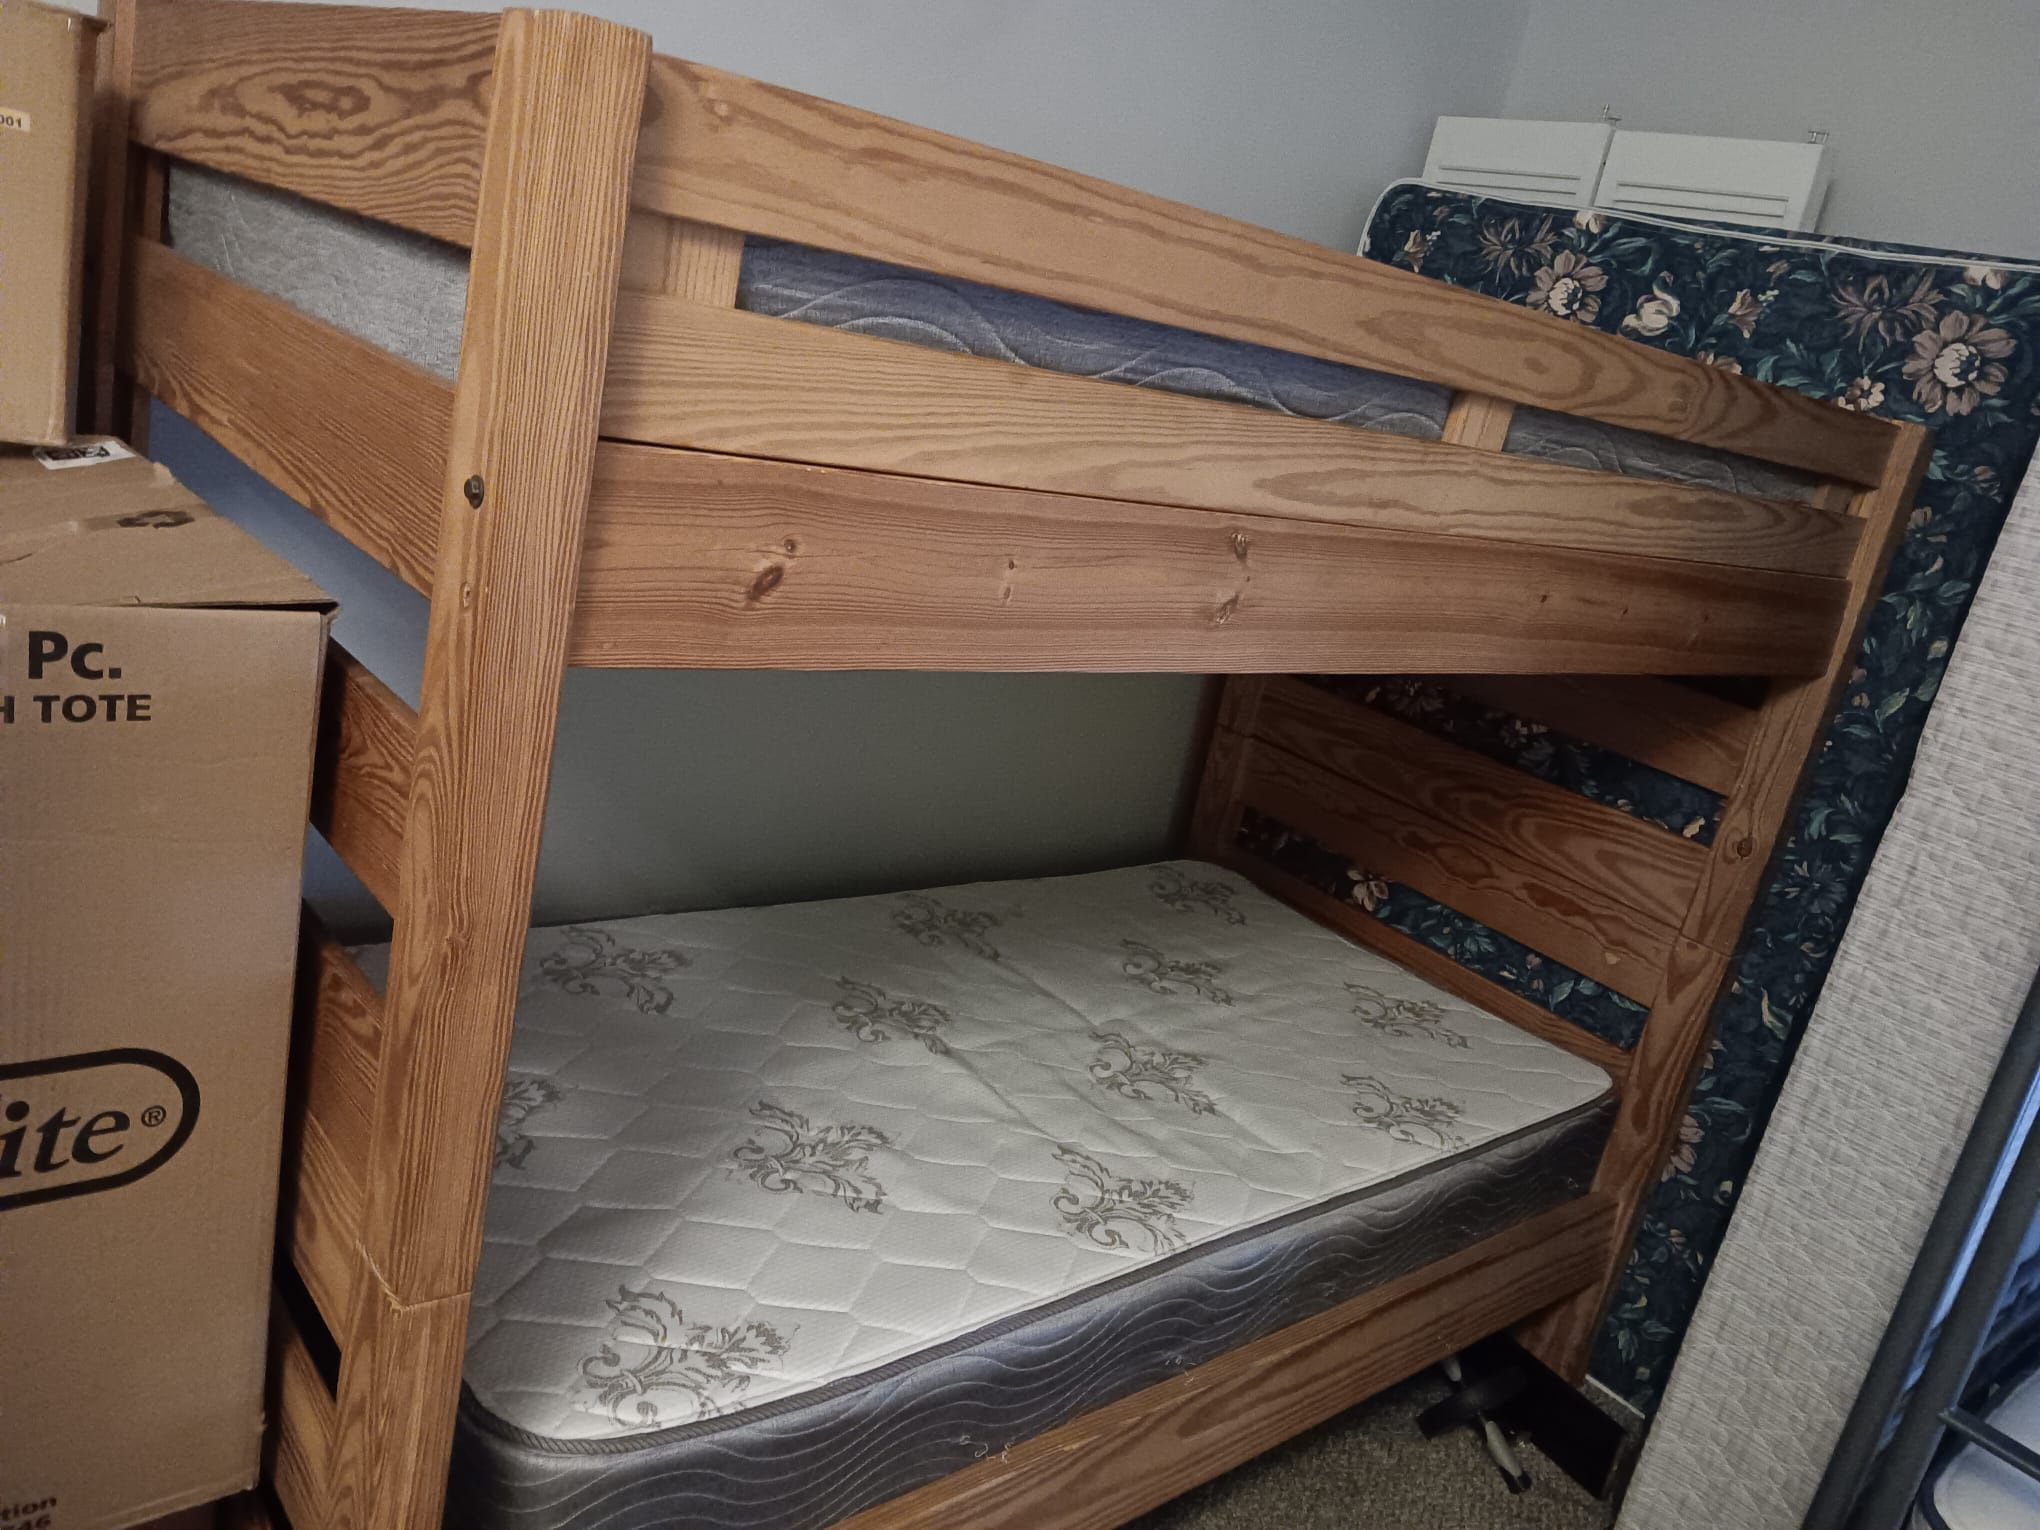 Wood Bunk Bed With Mattress